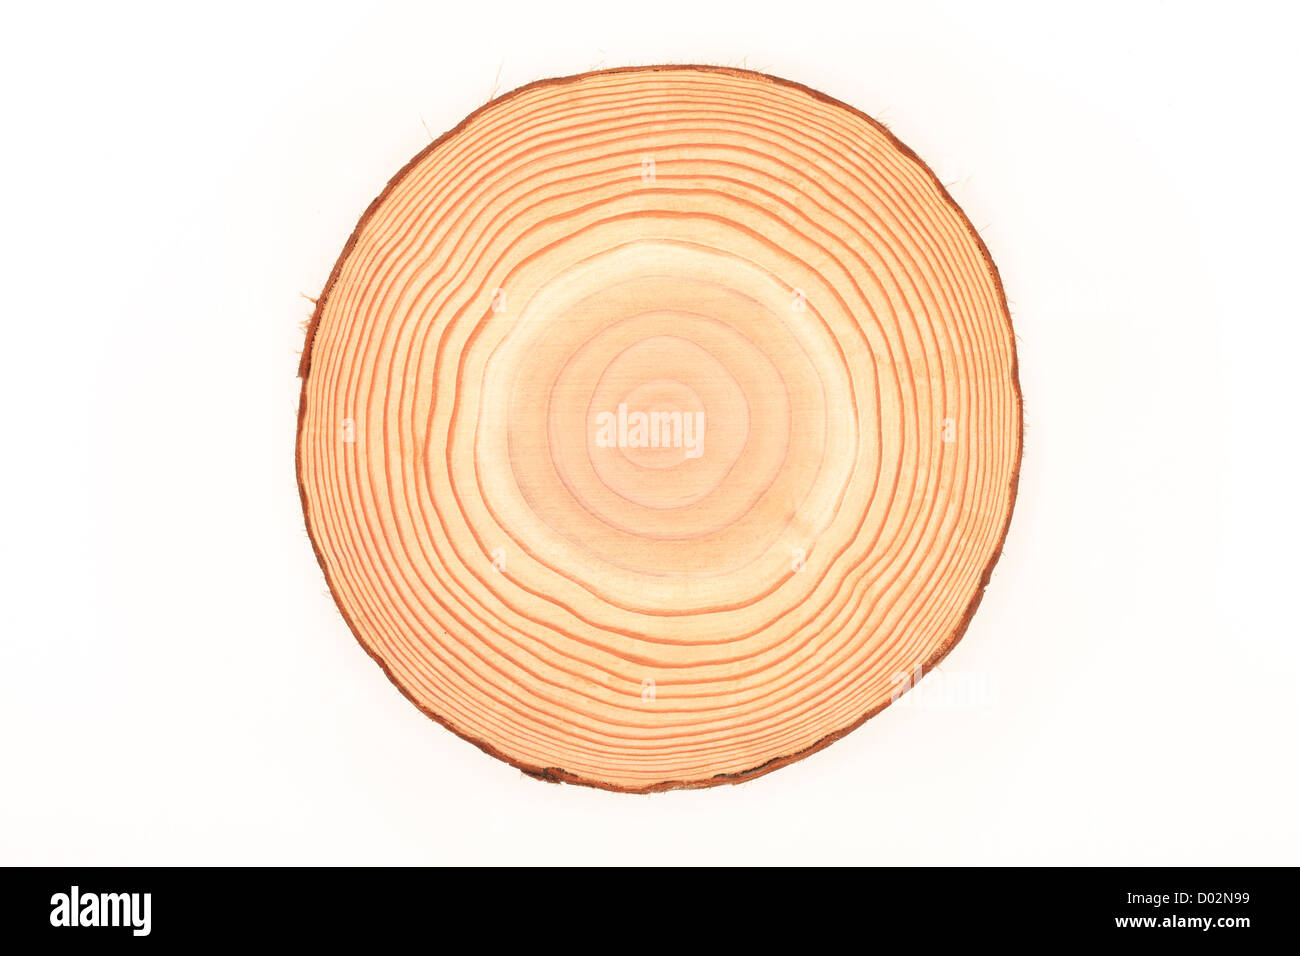 Annual rings of tree trunk Stock Photo